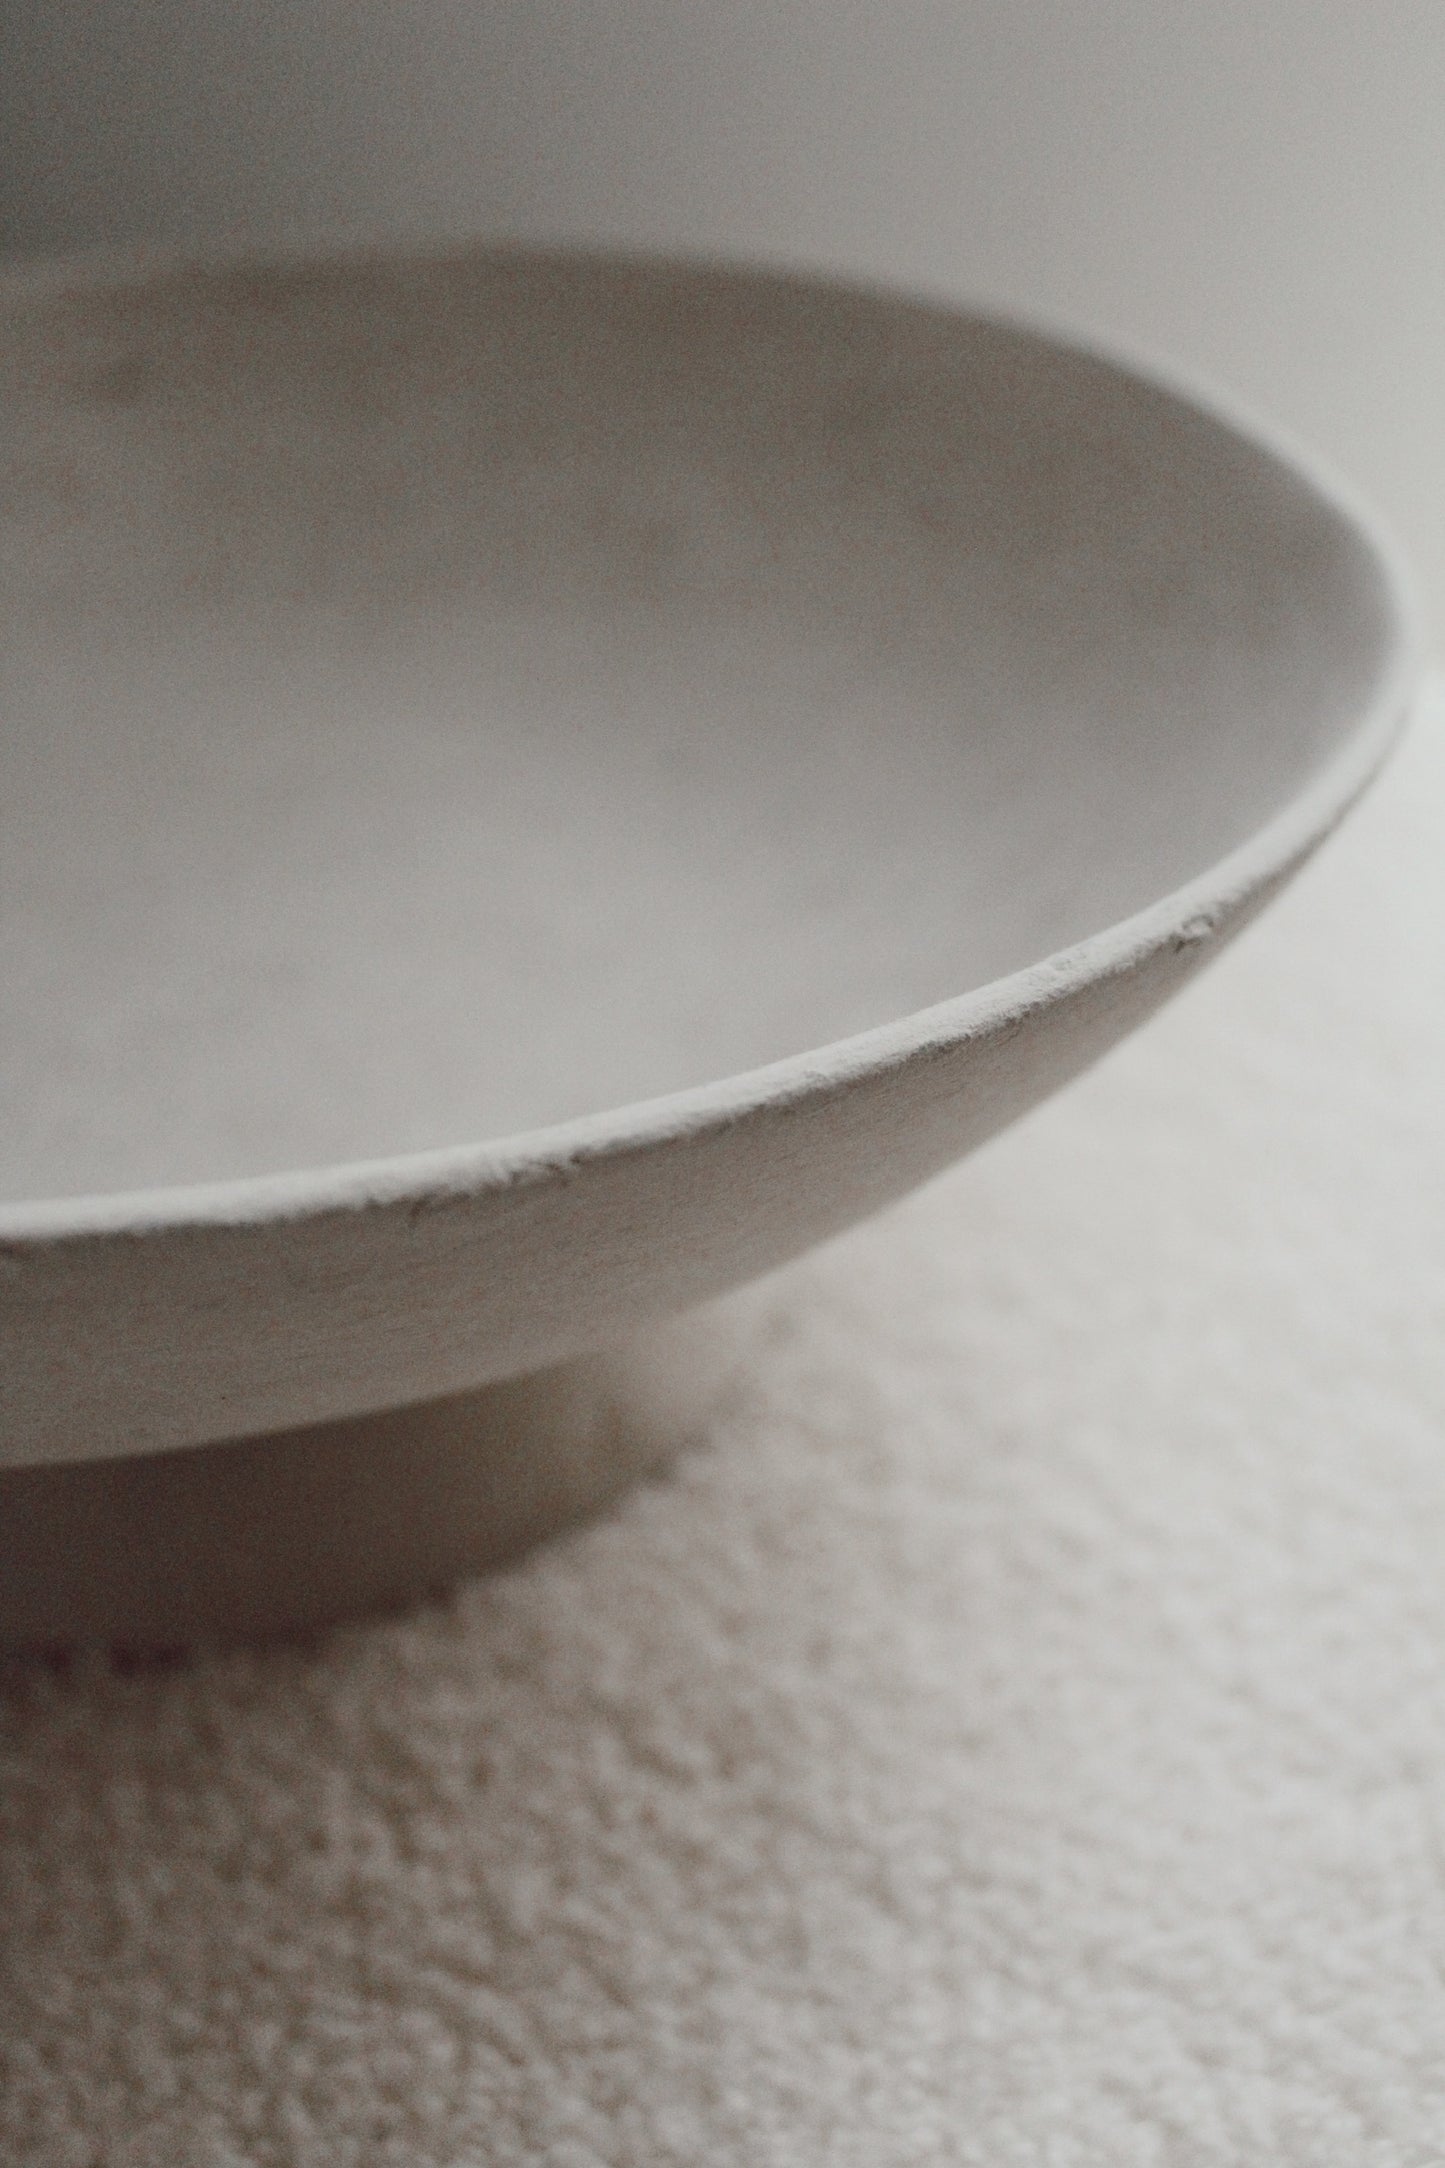 Chalky bowl